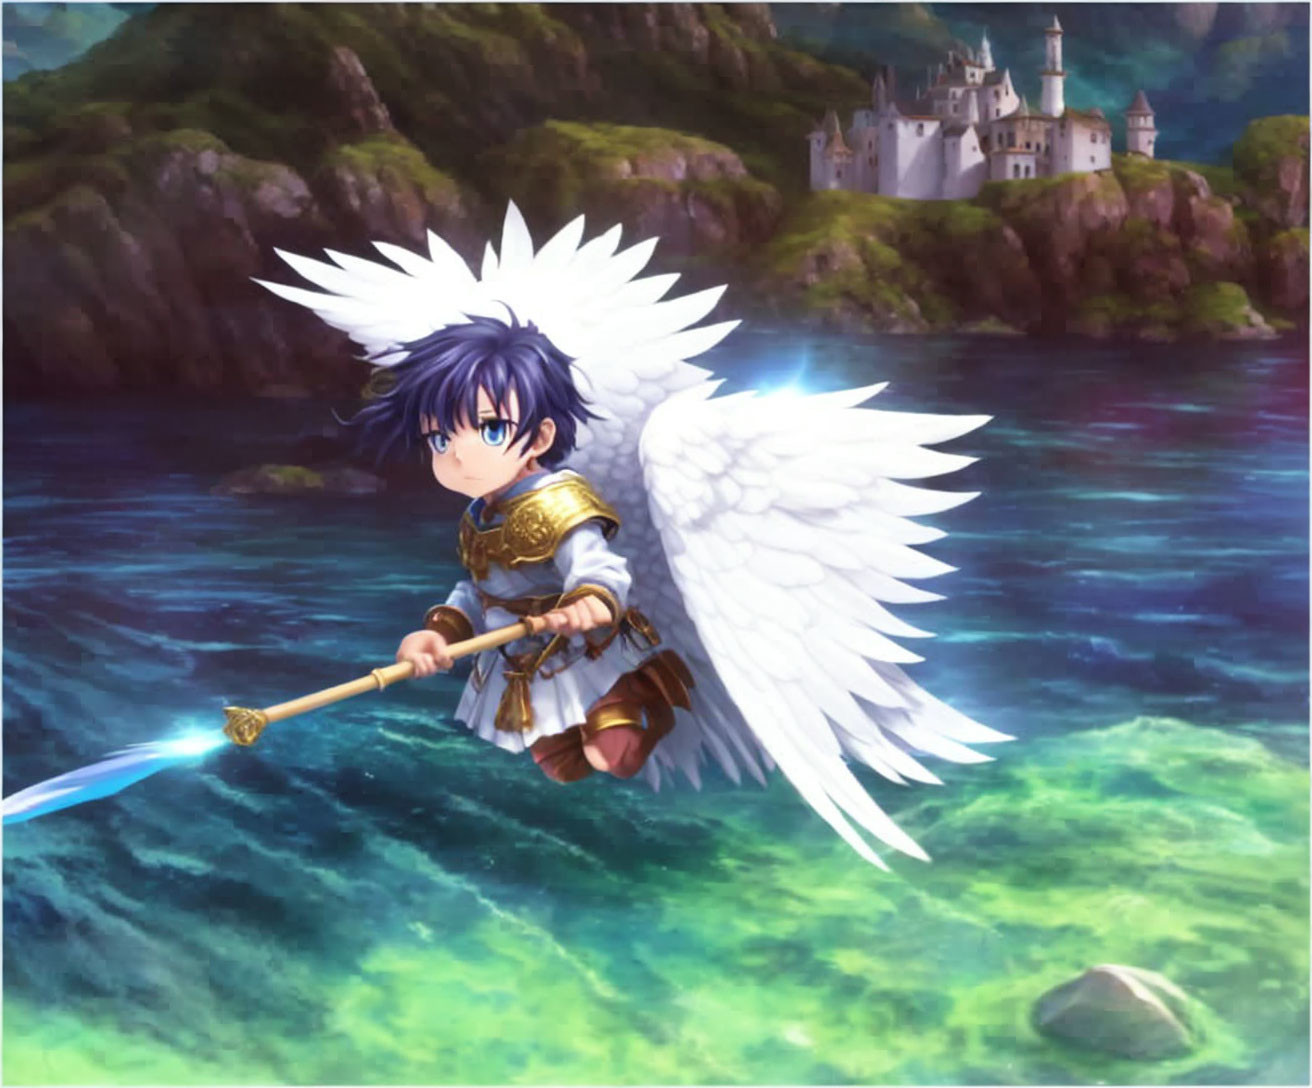 My Guardian Angel - Anime Love and Romance Wallpapers and Images - Desktop  Nexus Groups